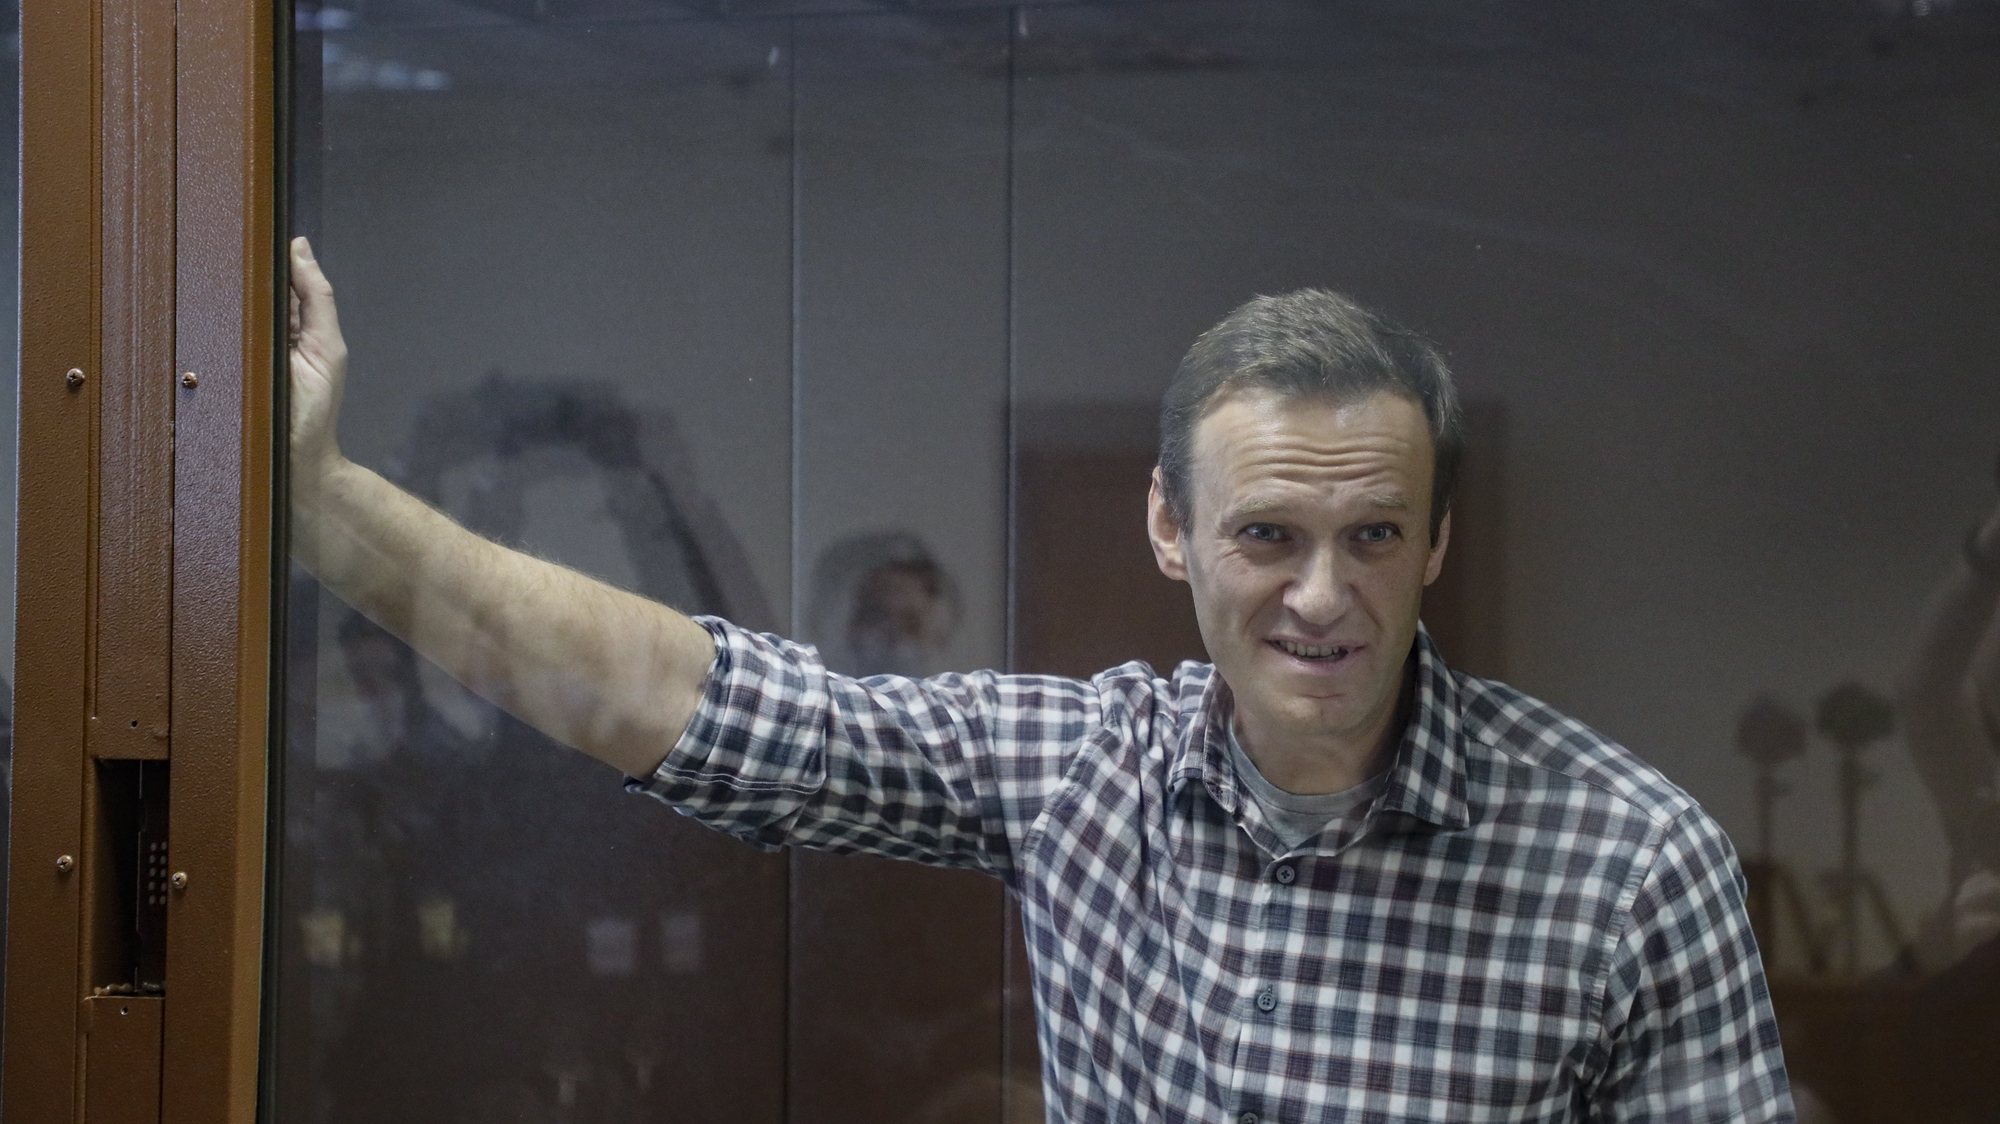 epa09025238 Russian opposition leader Alexei Navalny stands inside a glass cage prior to a hearing at the Babushkinsky District Court in Moscow, Russia, 20 February 2021. The Moscow City court will hold a visiting session at the Babushkinsky District Court Building to consider Navalny&#039;s lawyers appeal against a court verdict issued on 02 February 2021, to replace the suspended sentence issued to Navalny in the Yves Rocher embezzlement case with an actual term in a penal colony.  EPA/YURI KOCHETKOV MANDATORY CREDIT